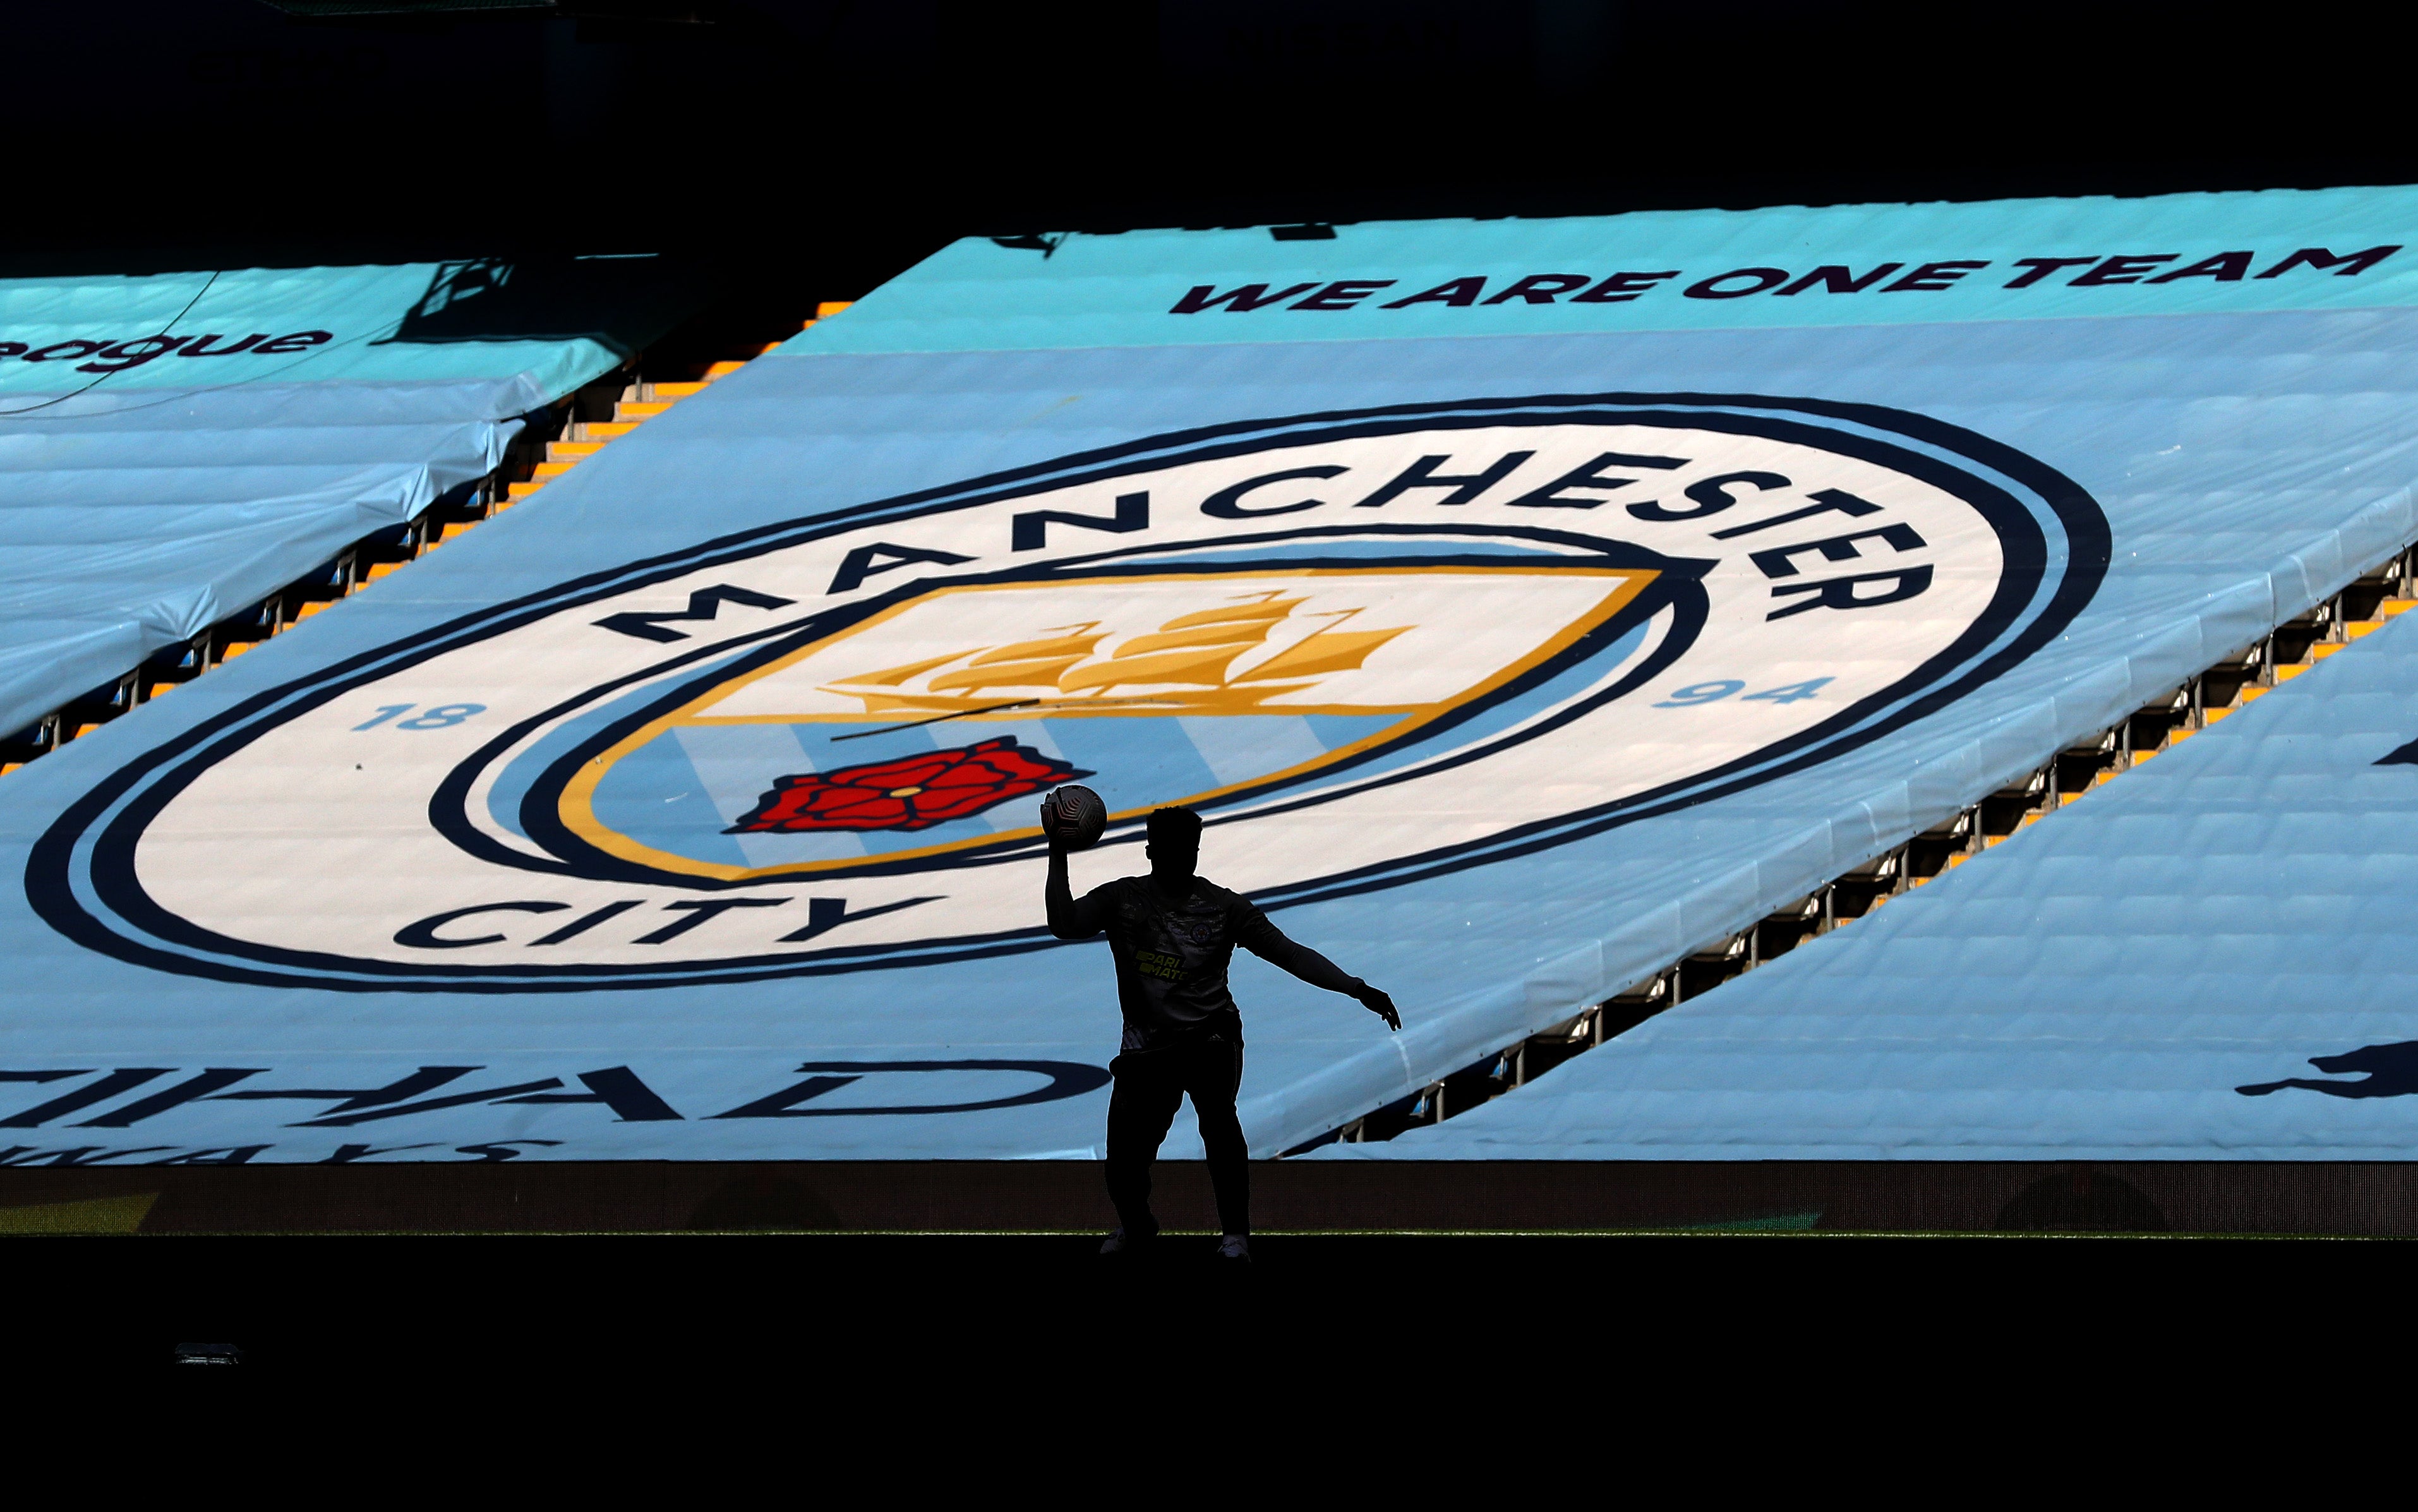 Man City case could join list of soccer's biggest scandals